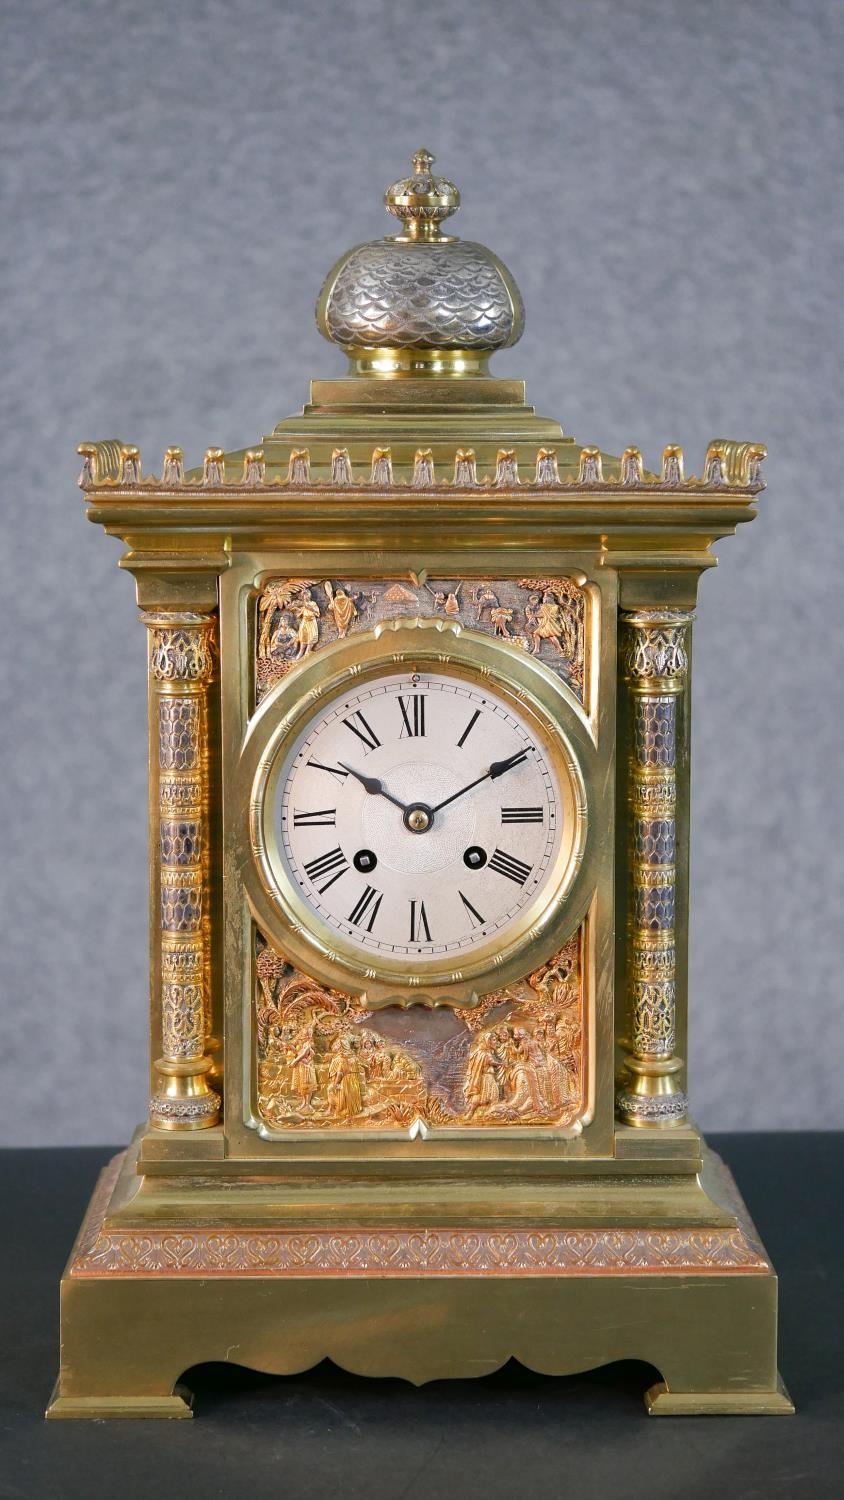 A 19th century tri-metal Egyptian relief design mantle clock of architectural form. Brass movement